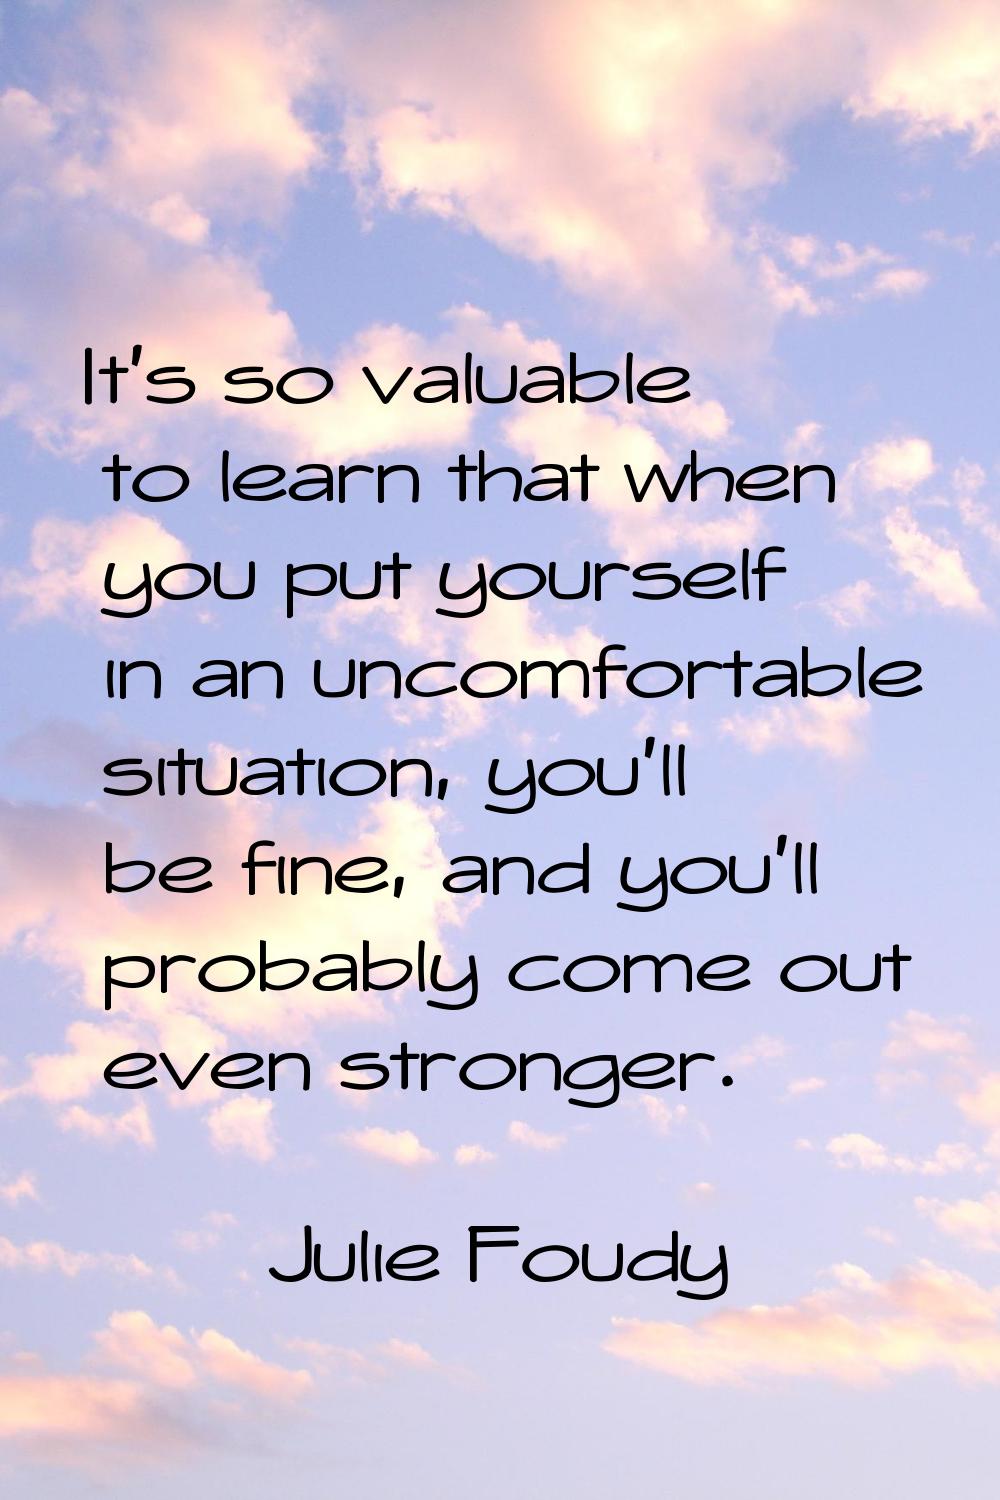 It's so valuable to learn that when you put yourself in an uncomfortable situation, you'll be fine,